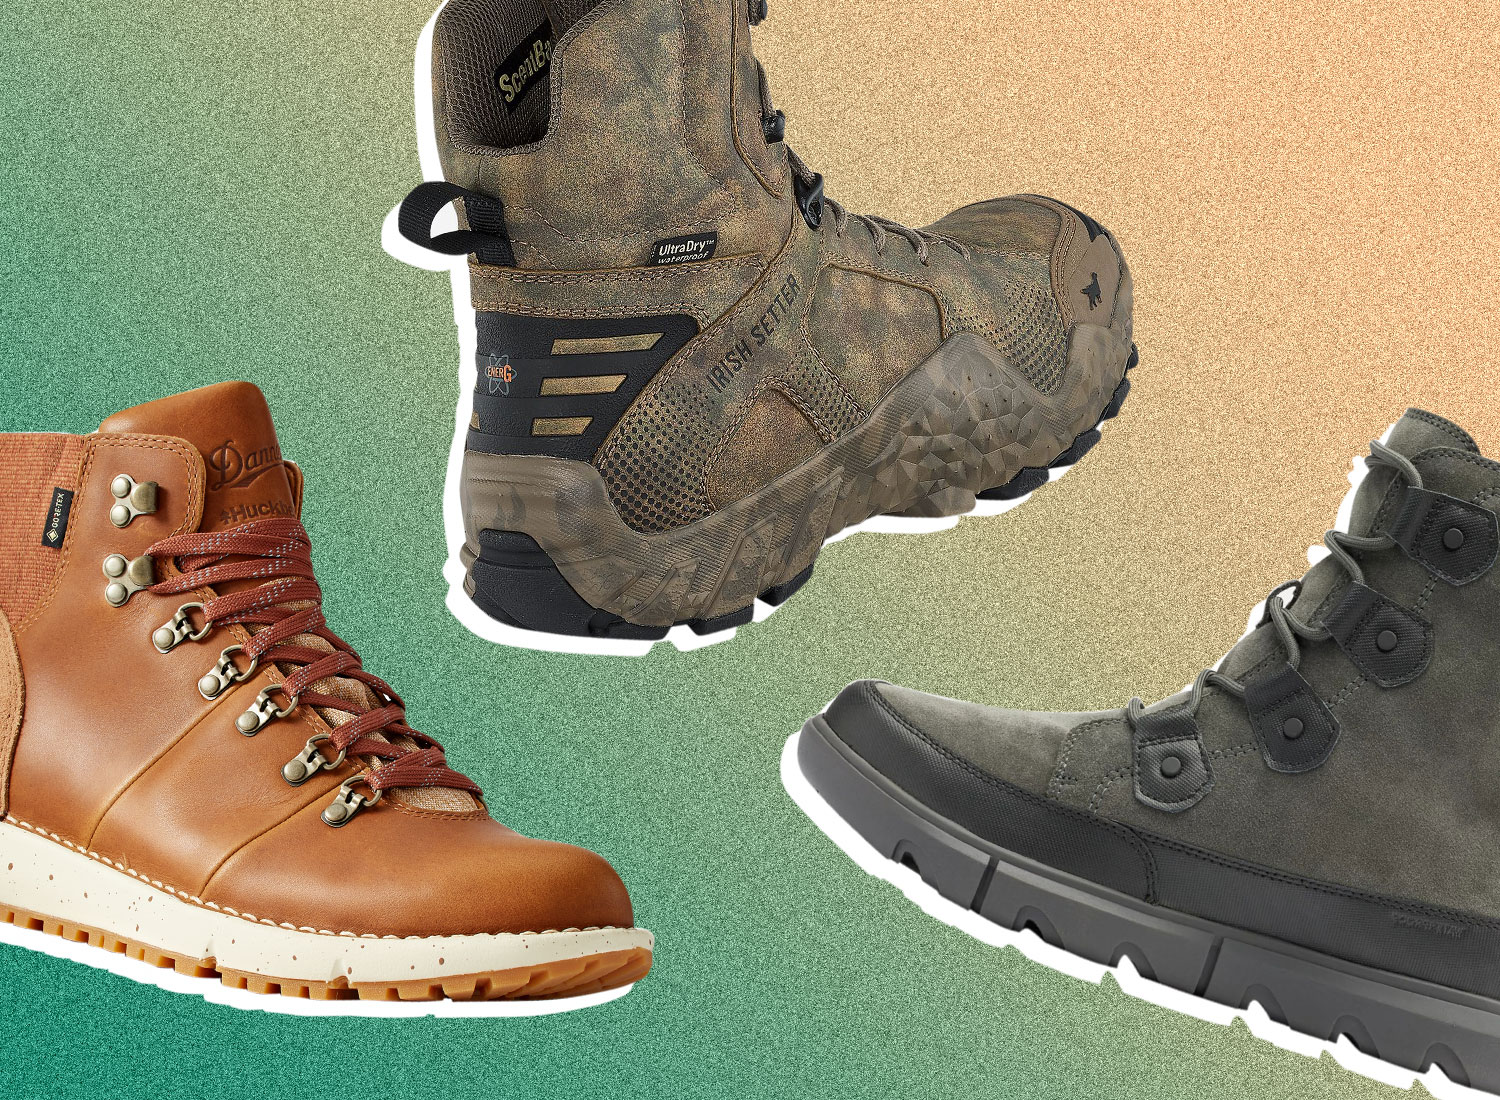 20 Best Hunting Boots: For Protection & Warmth